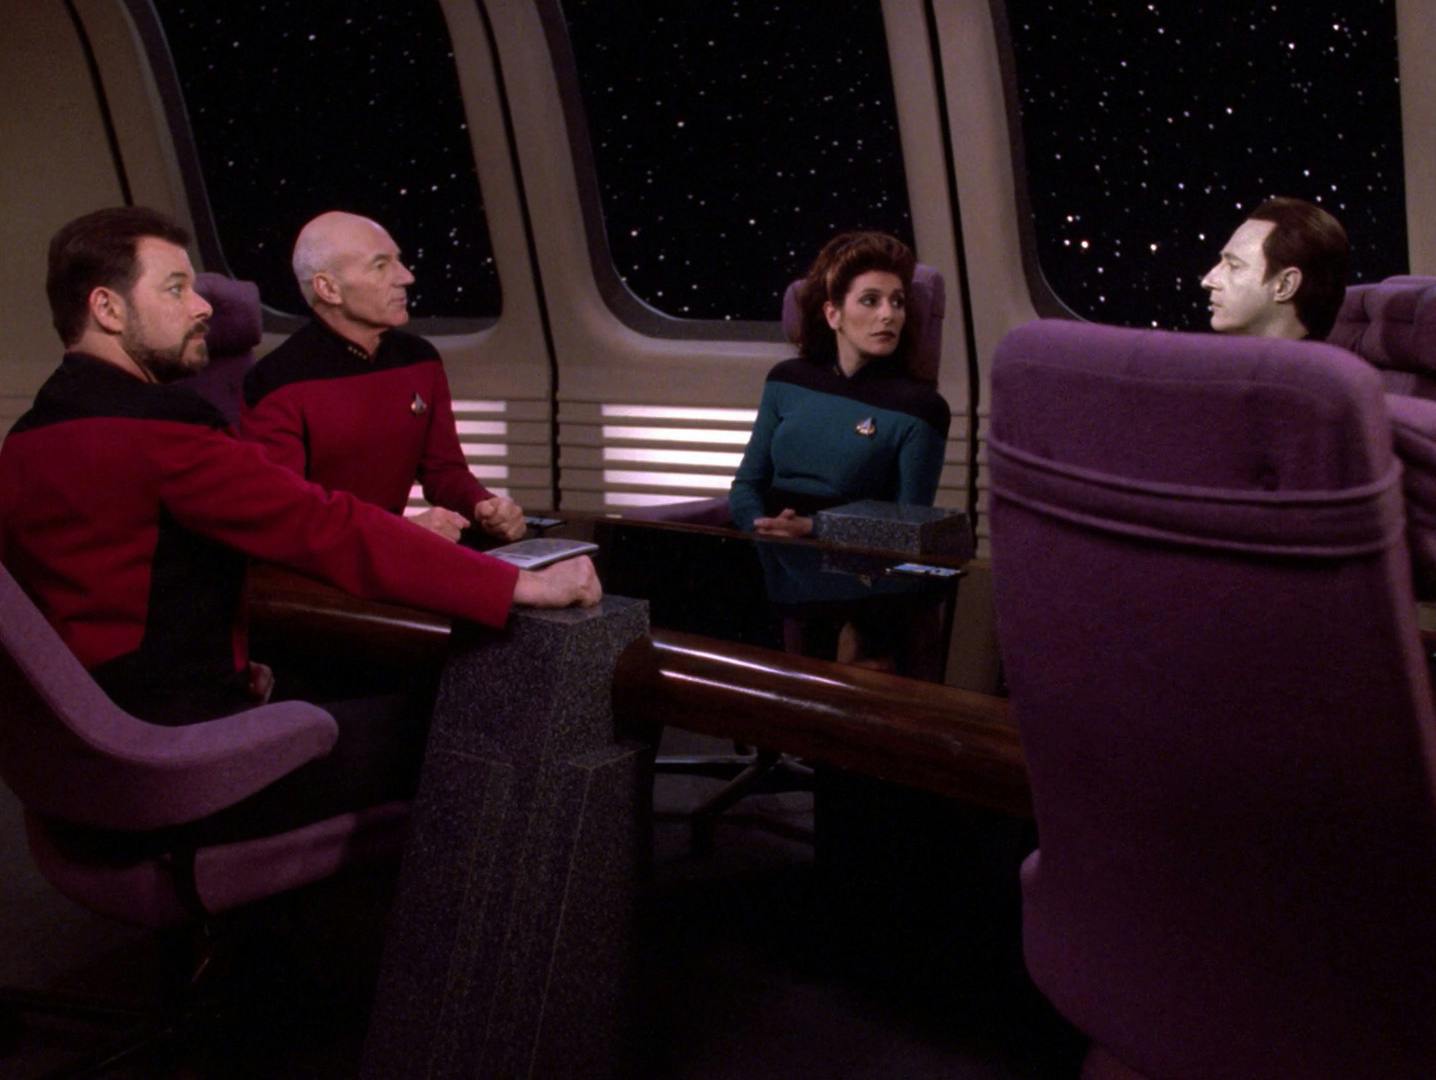 Picard consults with Riker, Troi, and Data in the Observation Lounge in 'All Good Things...'